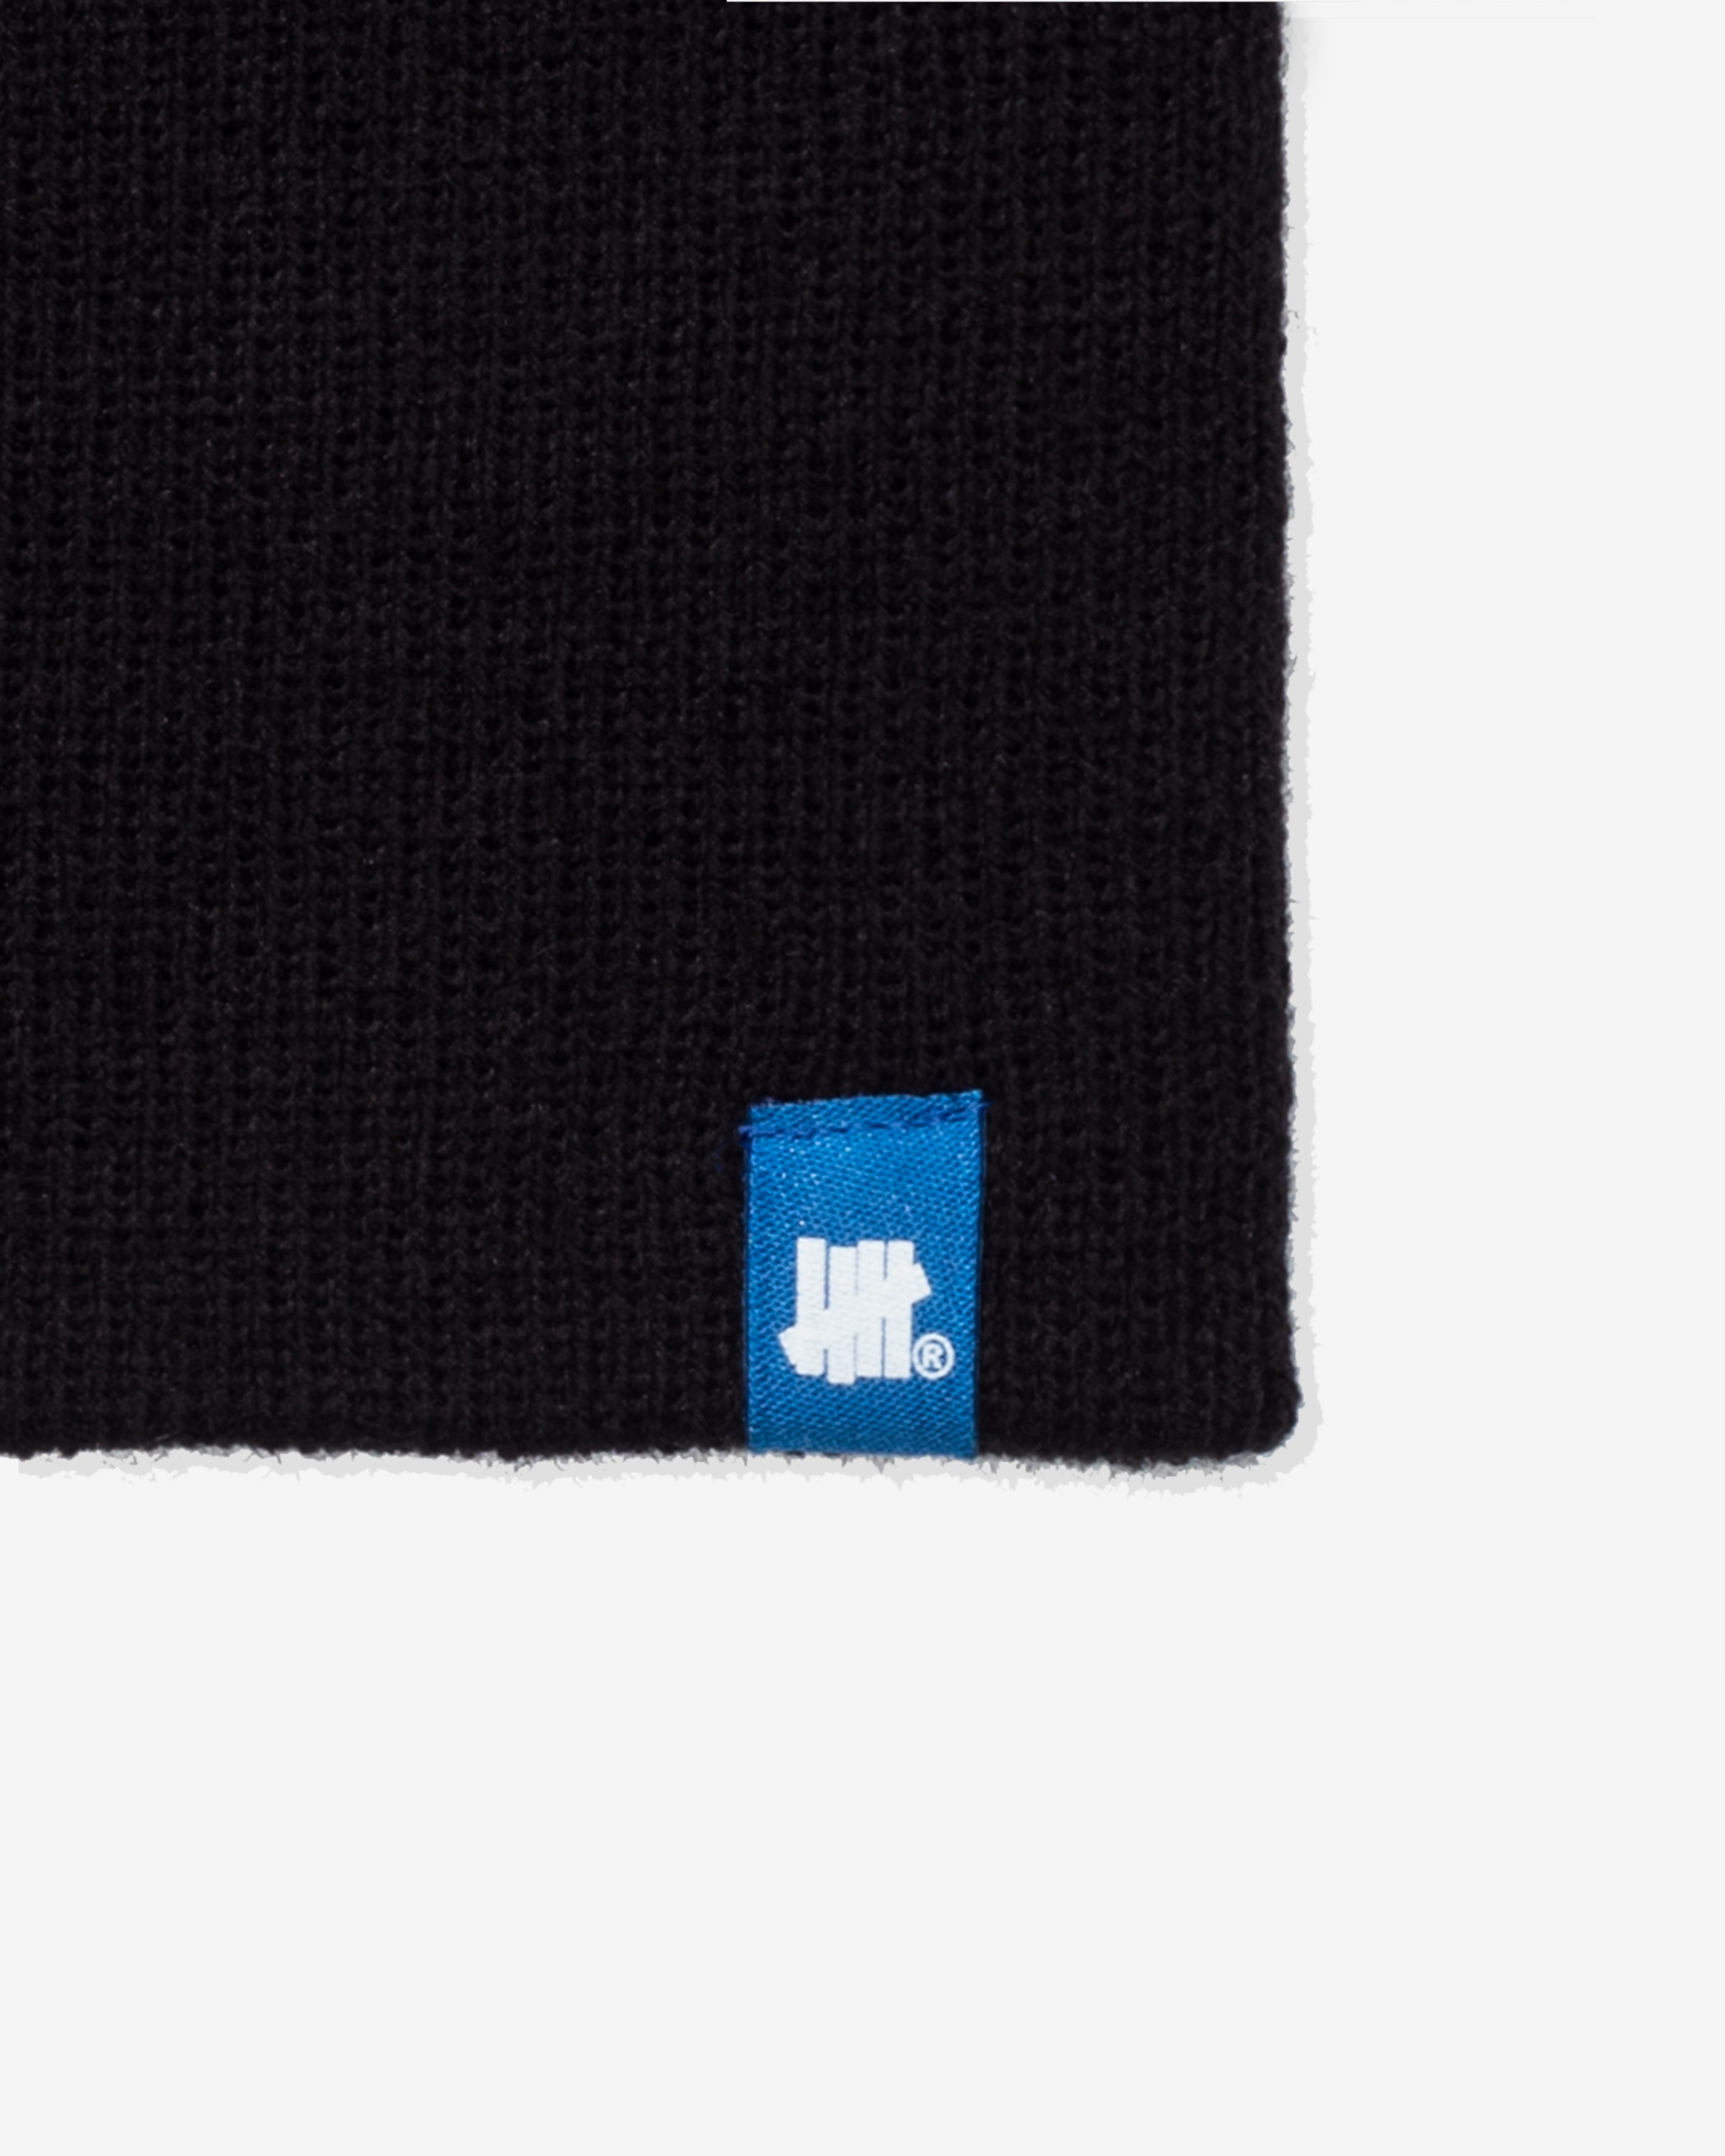 UNDEFEATED CLIP LABEL BEANIE - BLACK